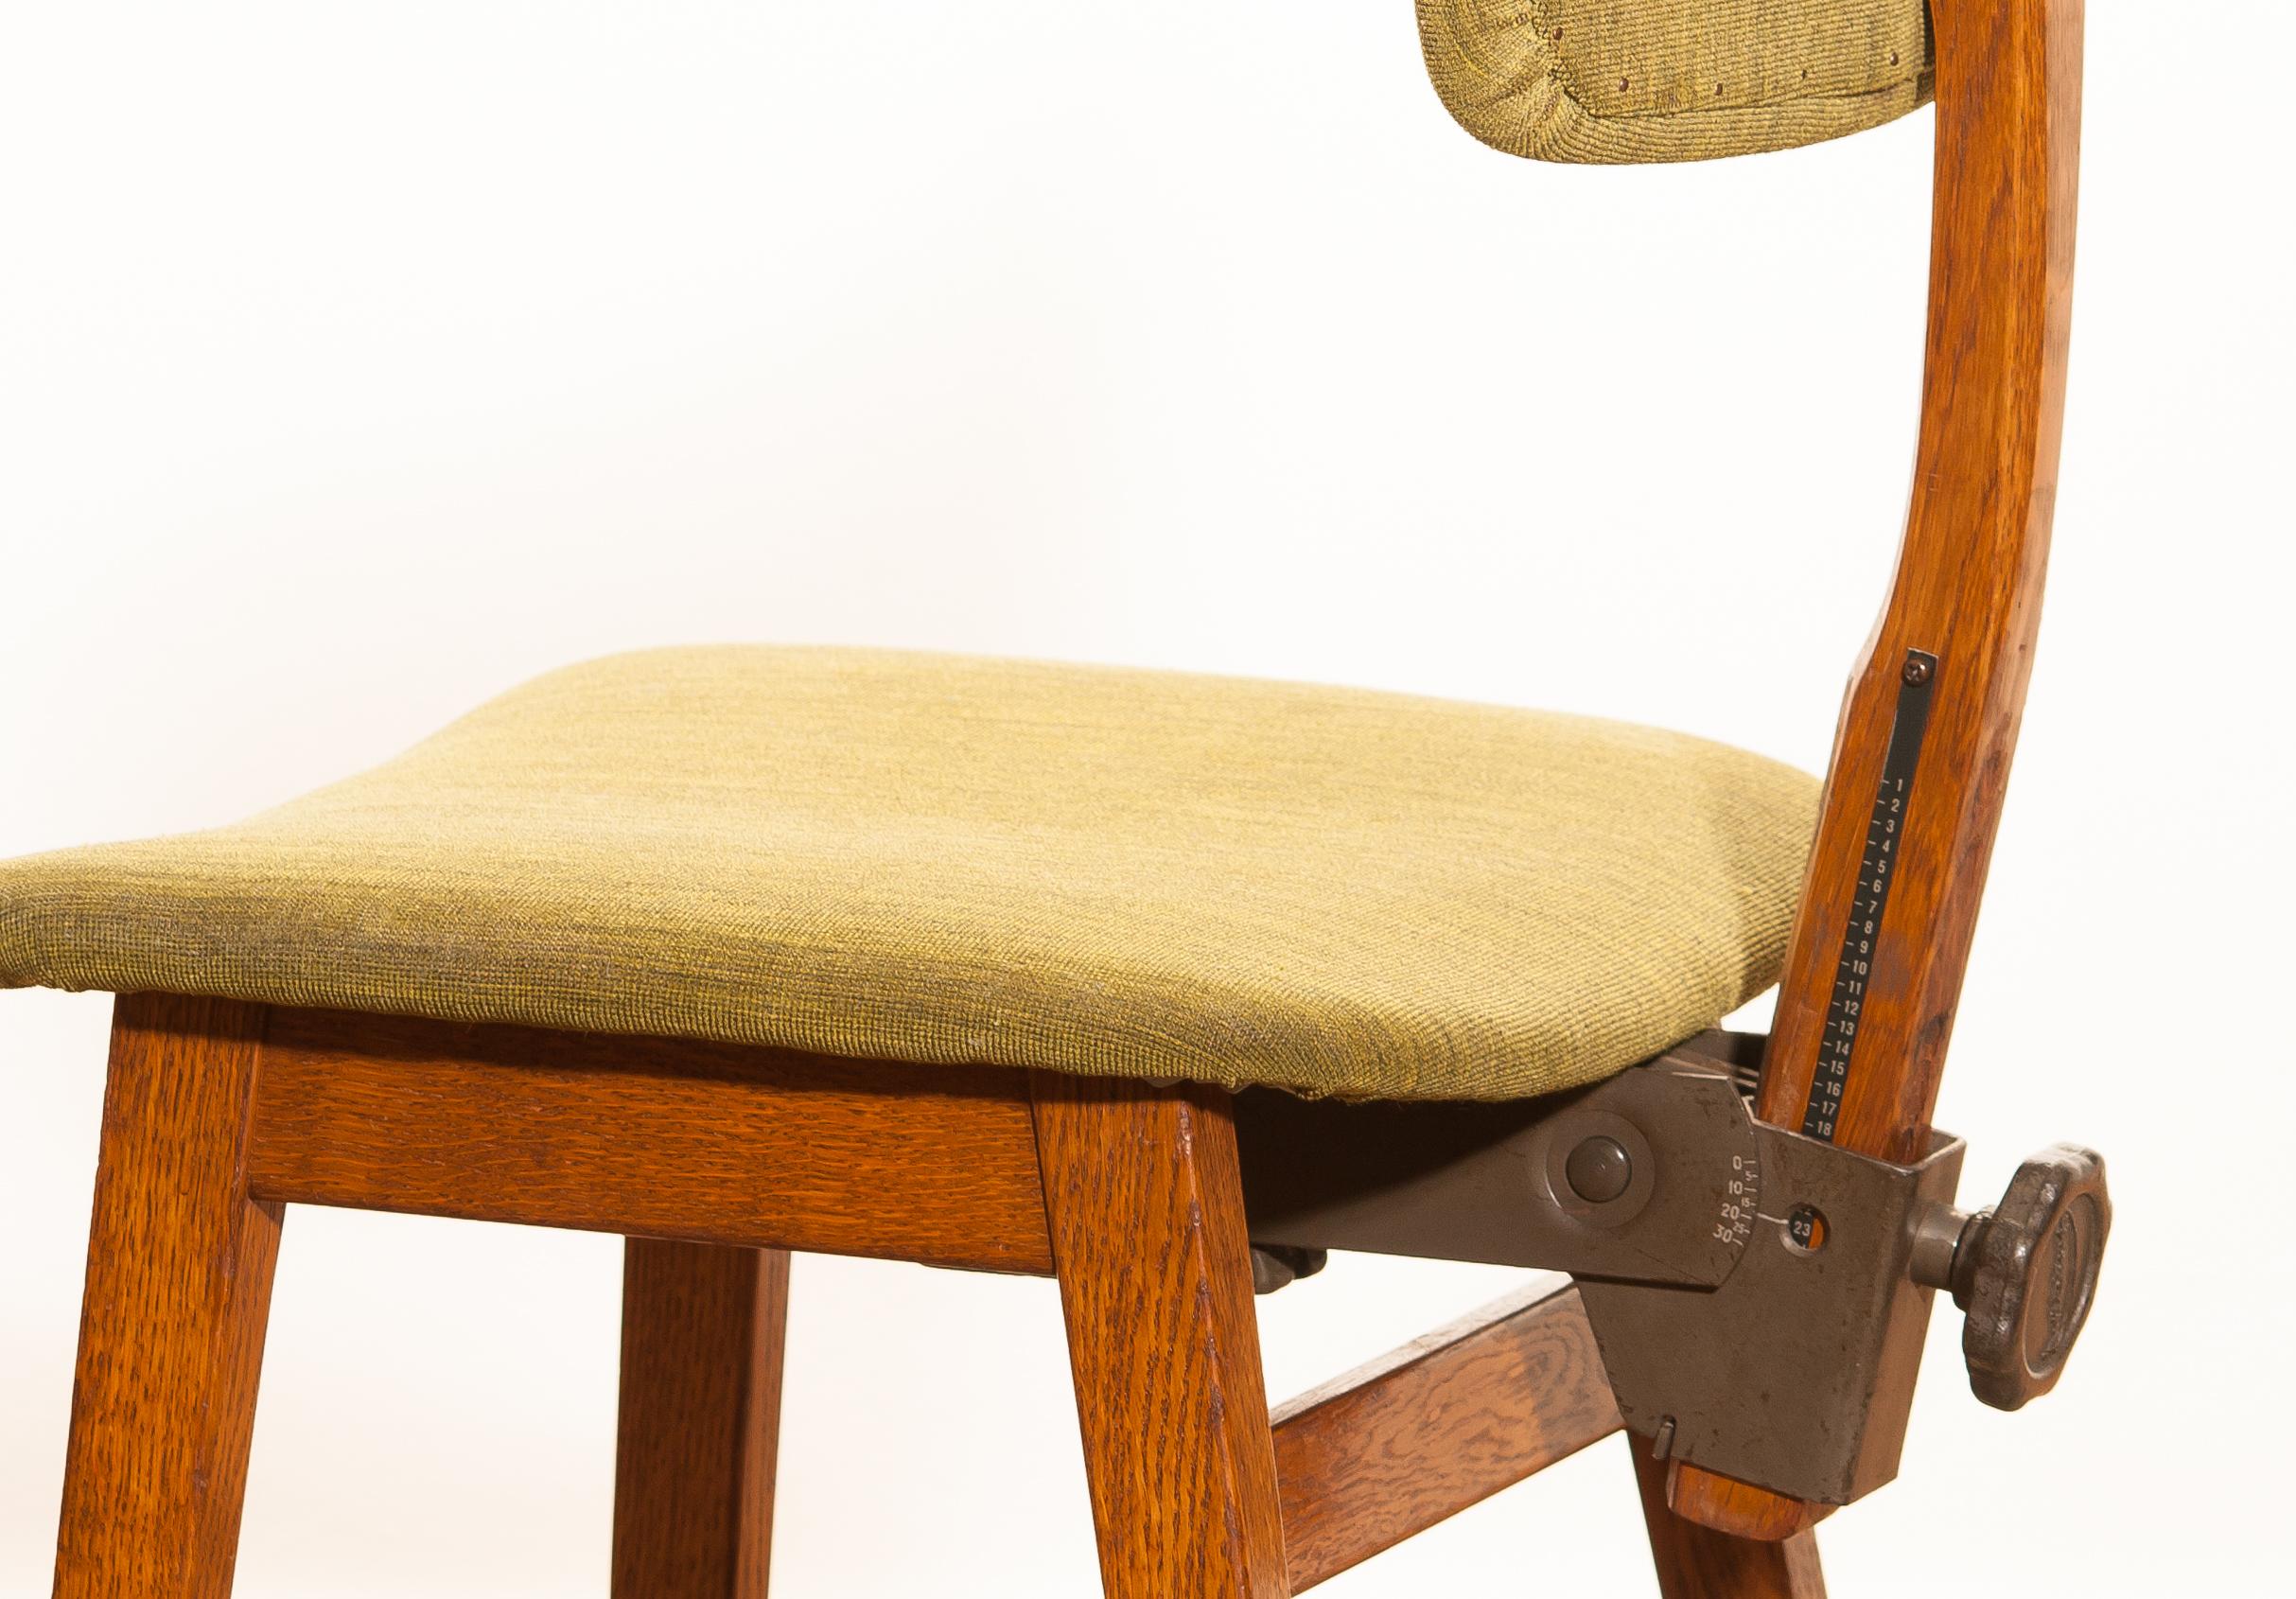 1960s, Teak and Wool Desk Chair by Âtvidabergs, Sweden 4